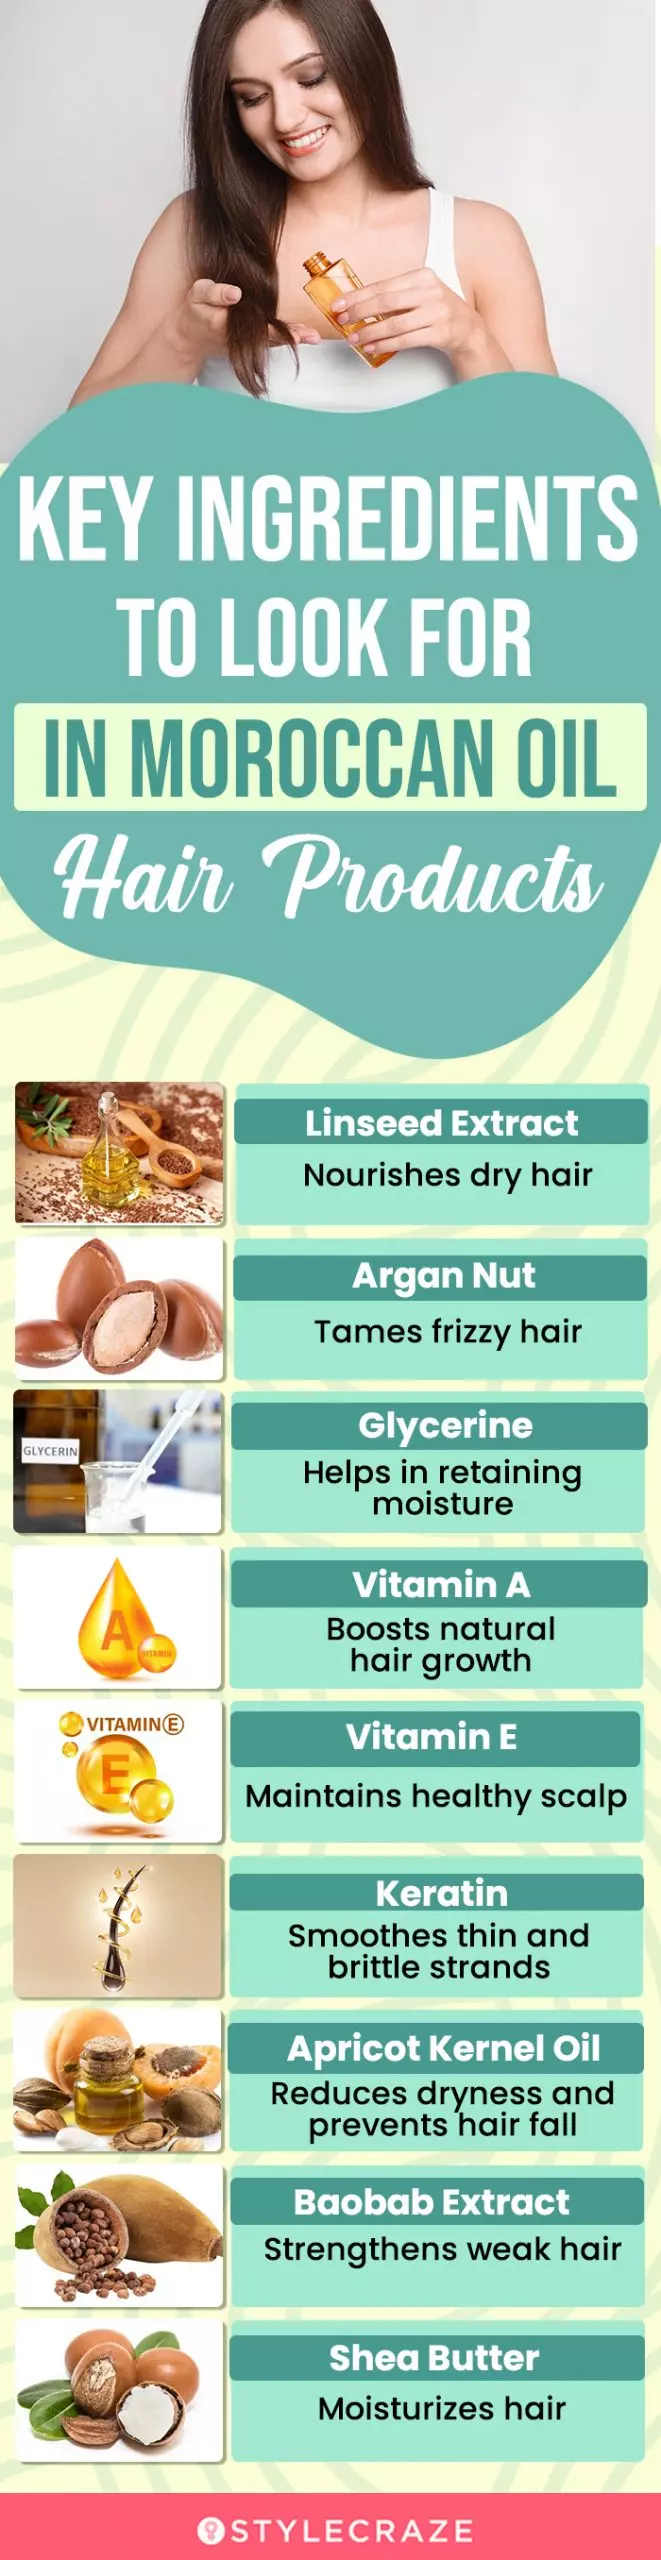 Key Ingredients To Look For In MoroccanOil Hair Products (infographic)